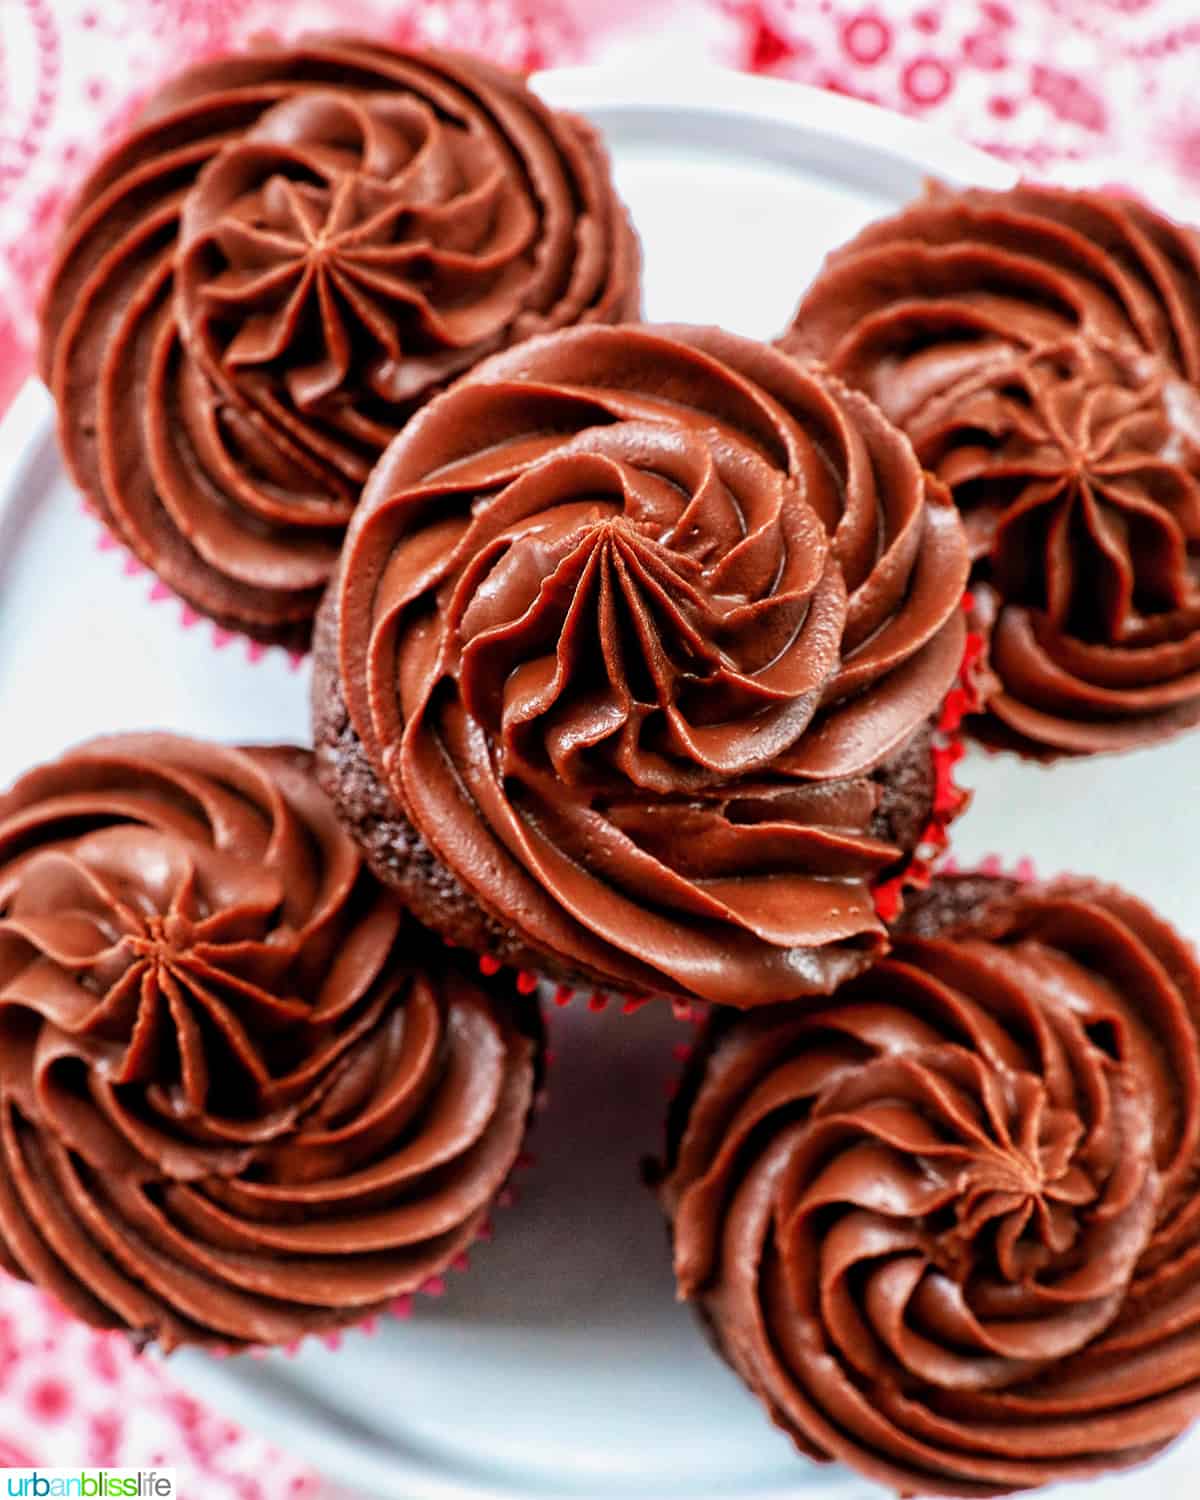 chocolate cupcakes with chocolate fudge frosting stacked on a cake pedestal.